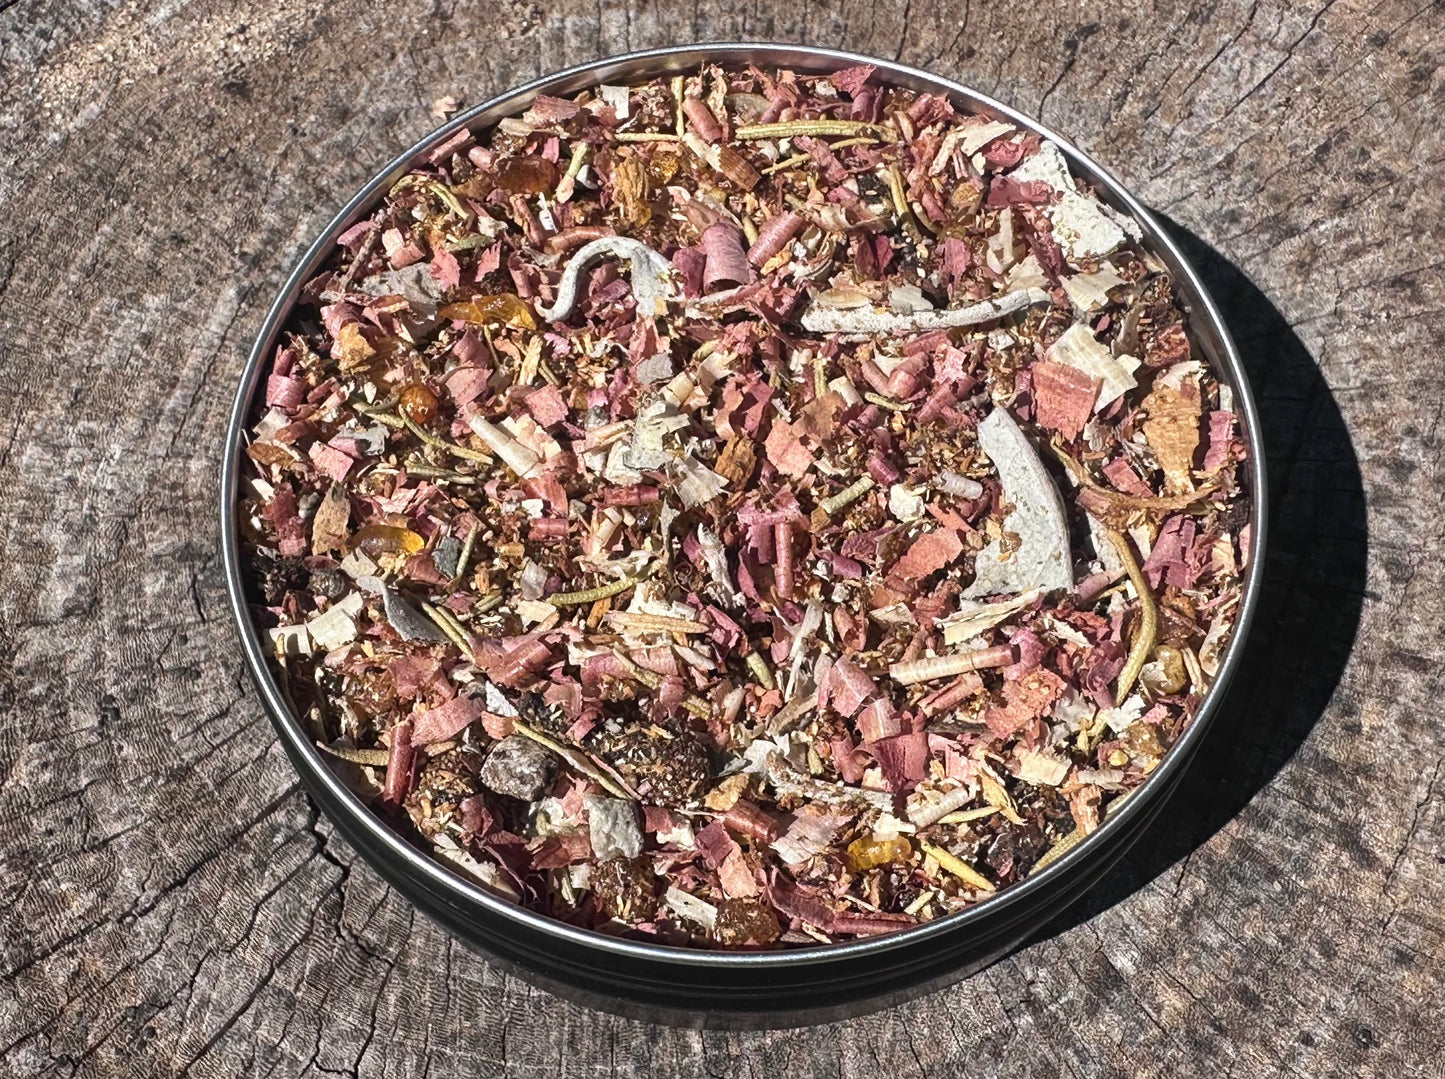 Shamans Shaumerio - Colombian Ceremonial incense blend